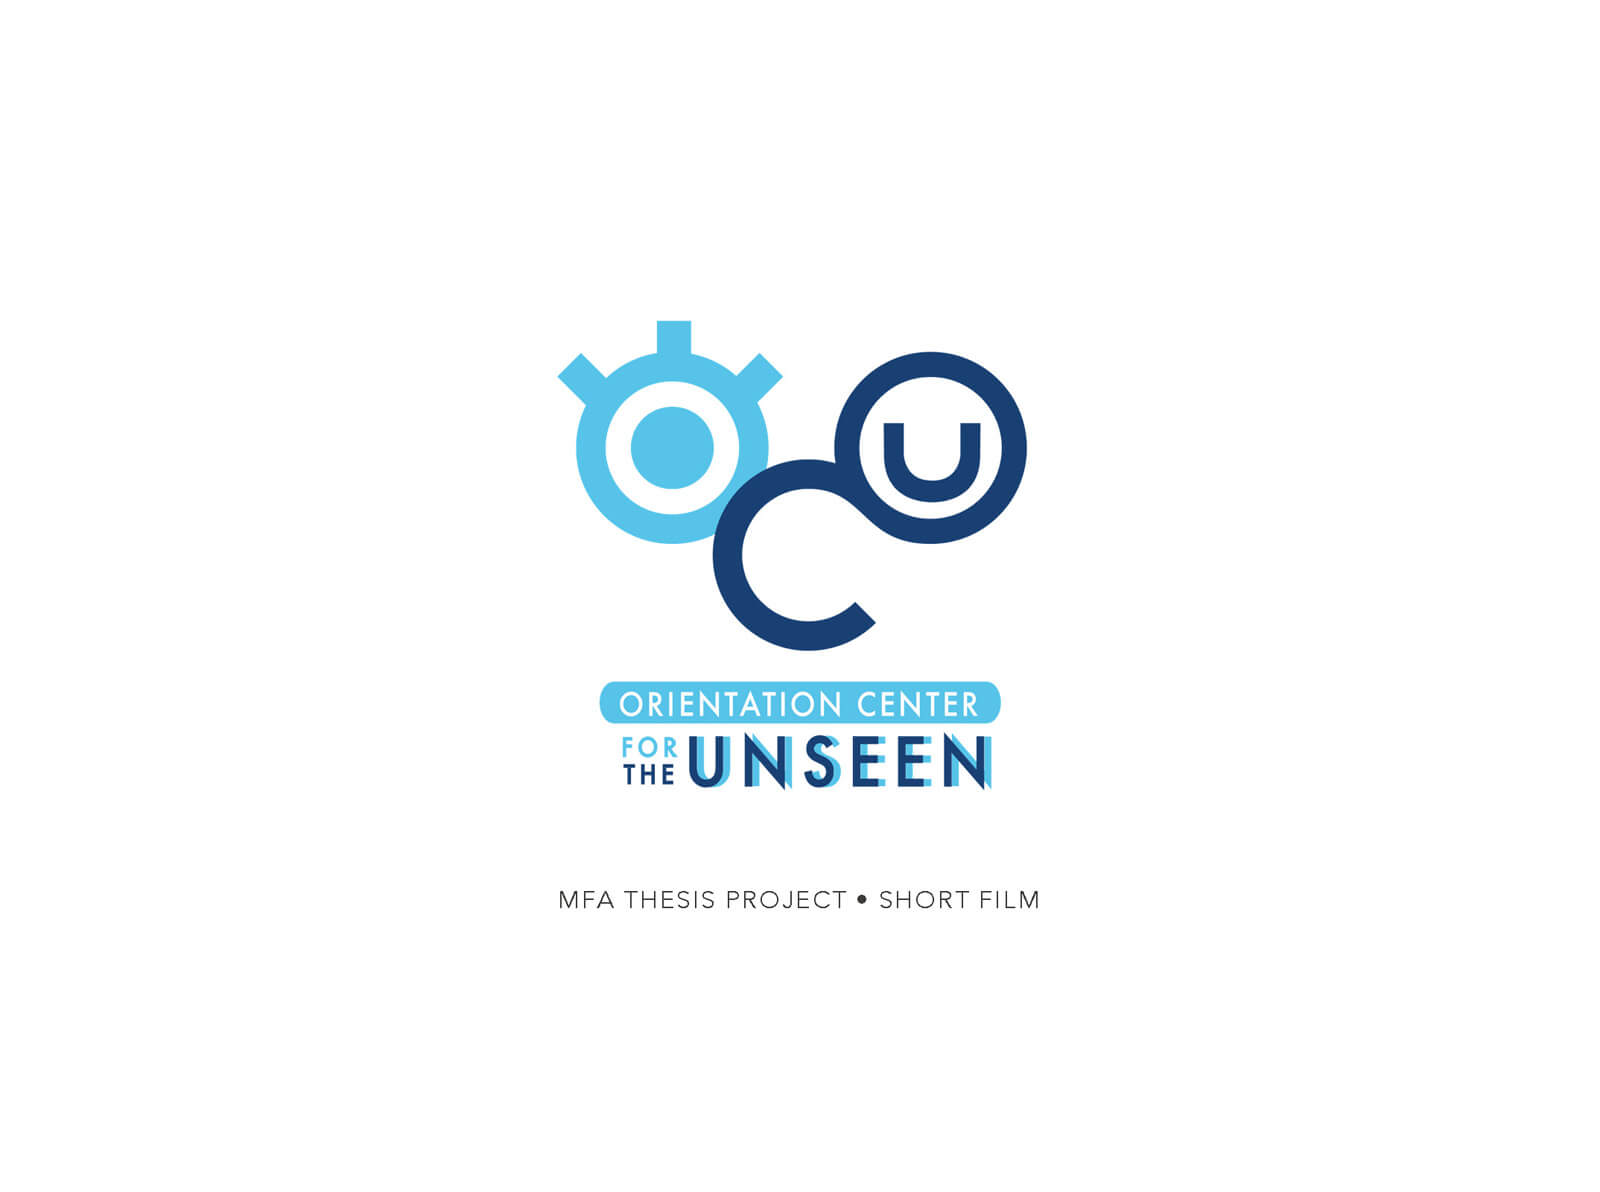 Title slide for the short film Orientation Center for the Unseen, depicting a stylized, blue and light blue logo